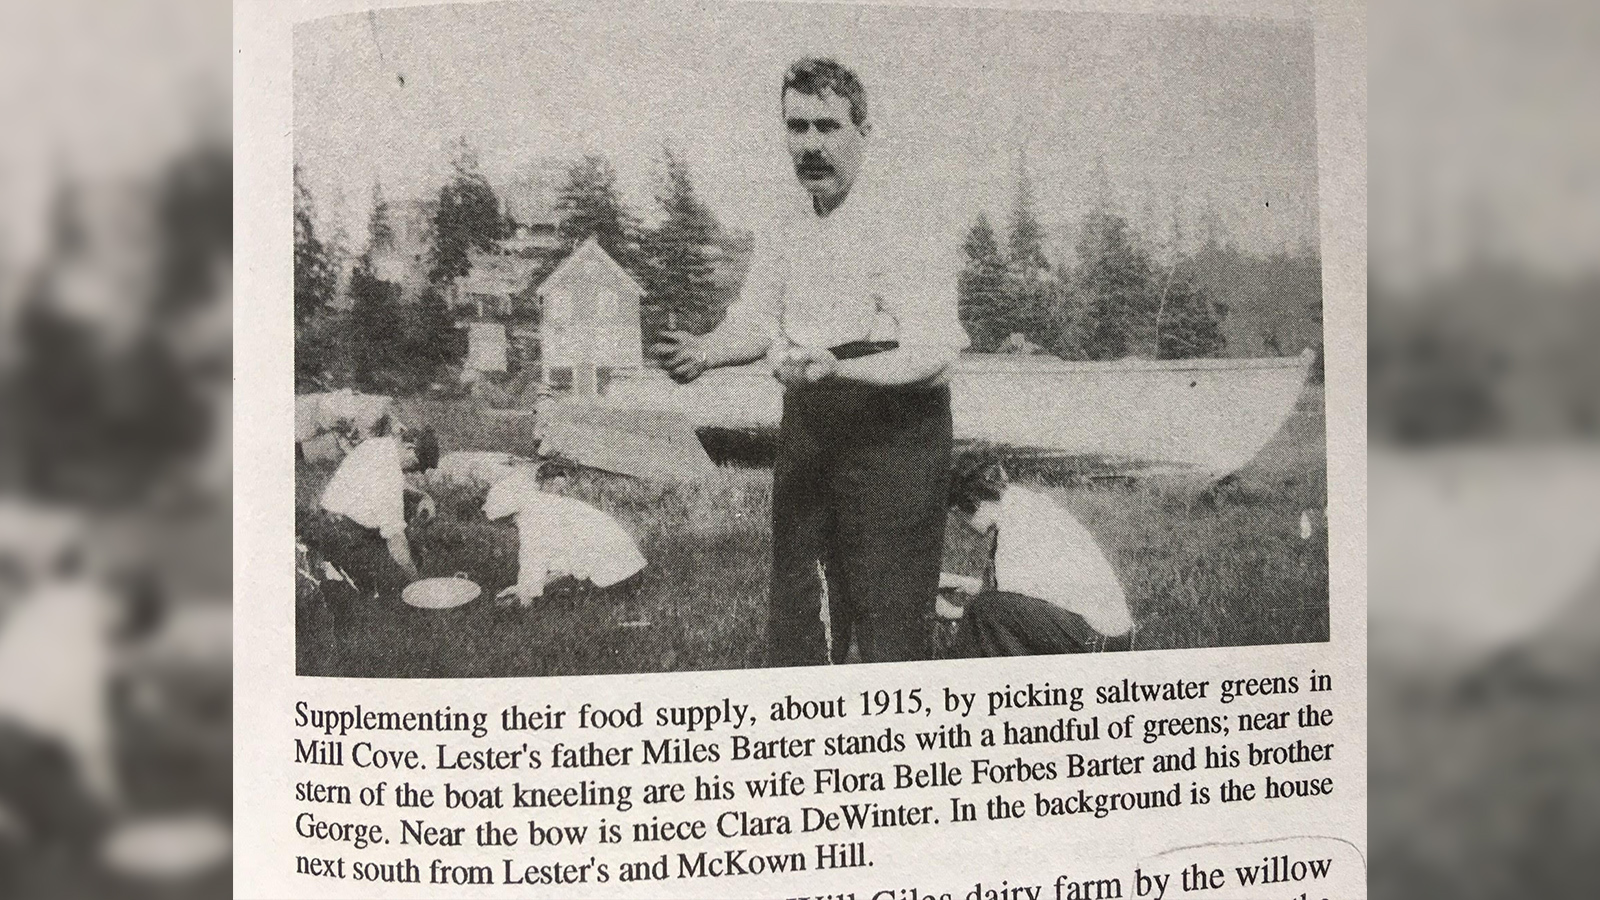 Miles Barter holding saltwater greens in a newspaper photo